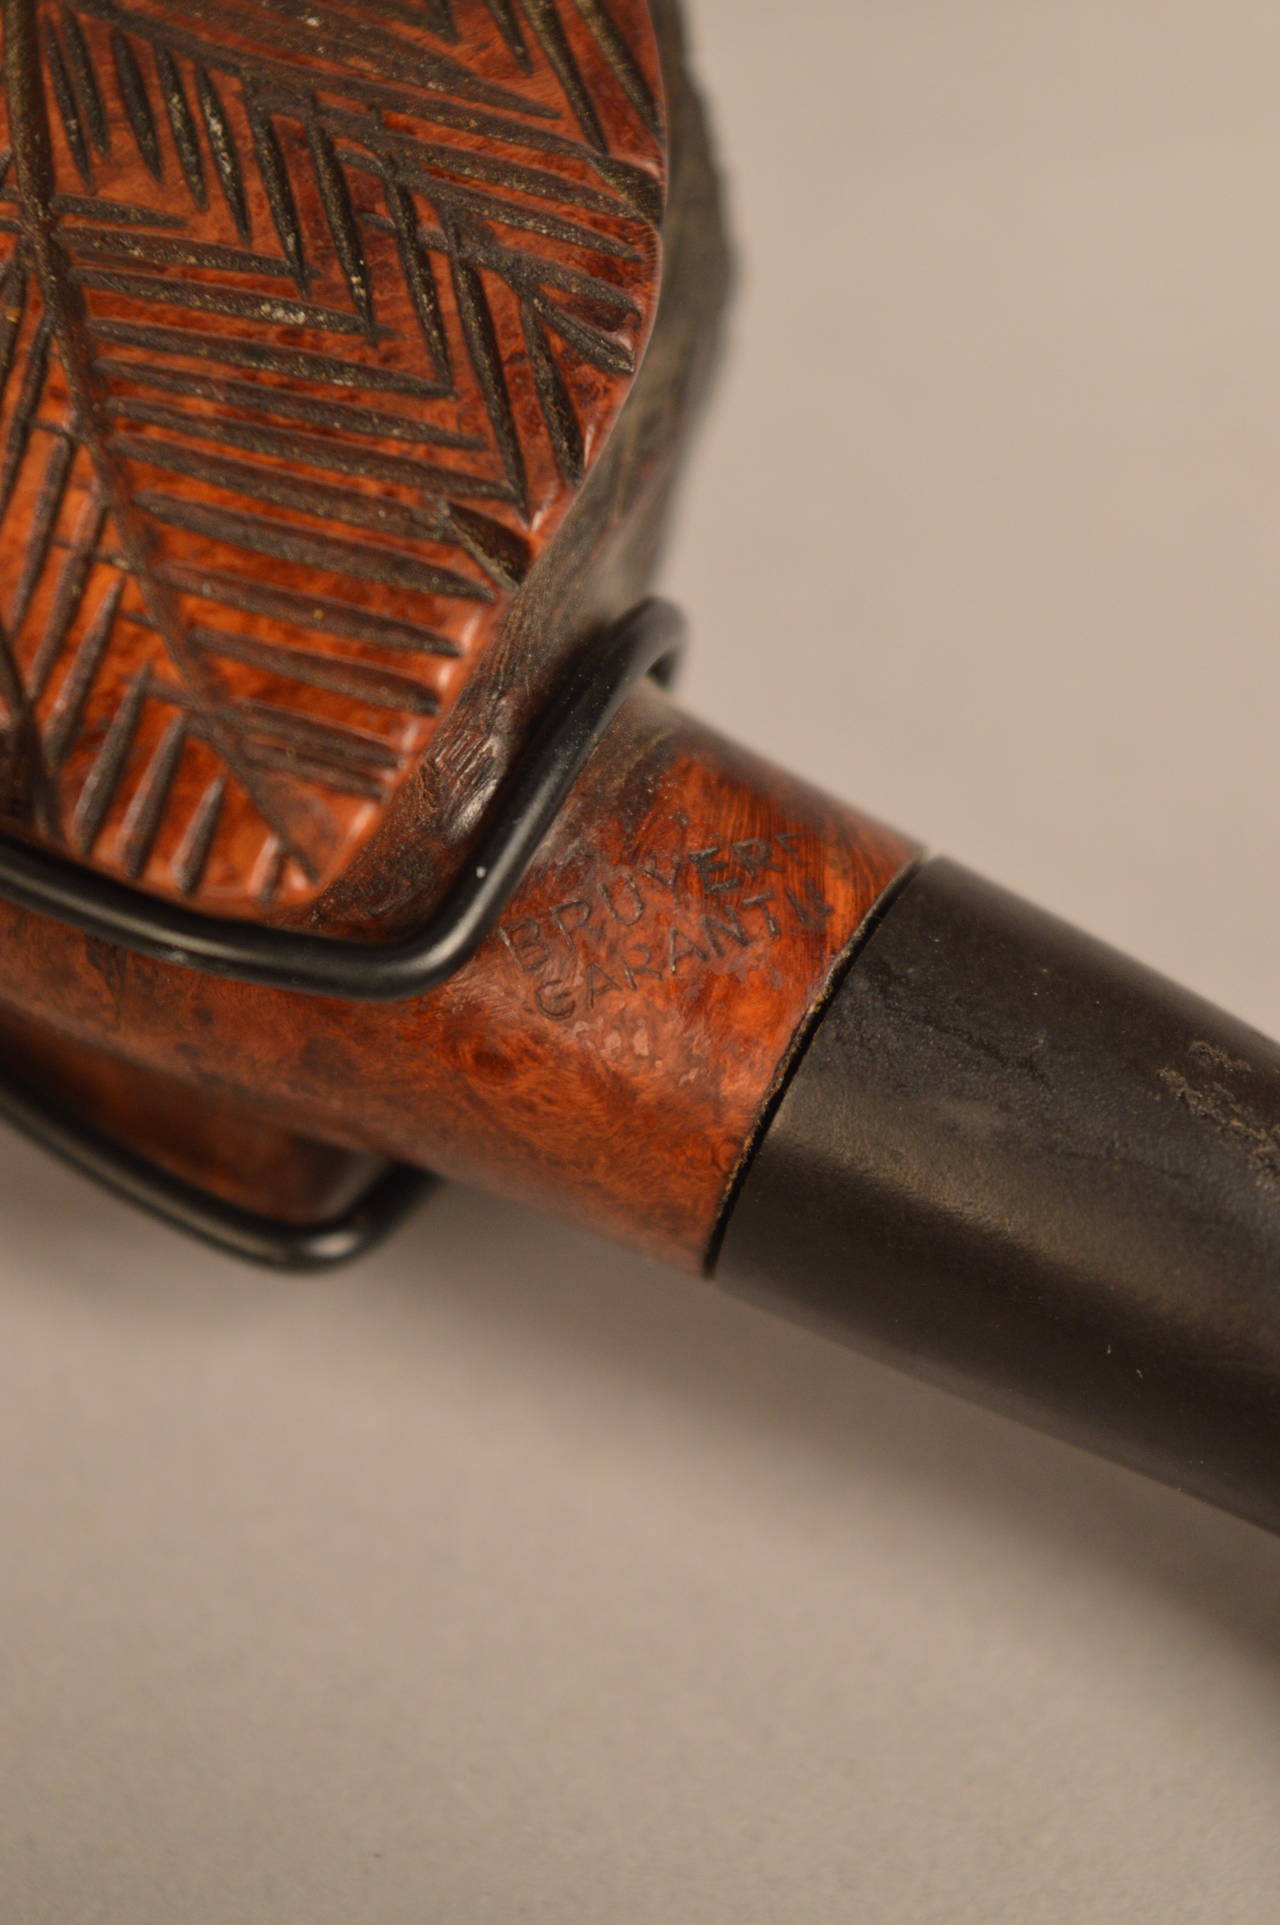 Early 20th Century Vintage French Briarwood Pipe Carved With A Native American Indian Chief